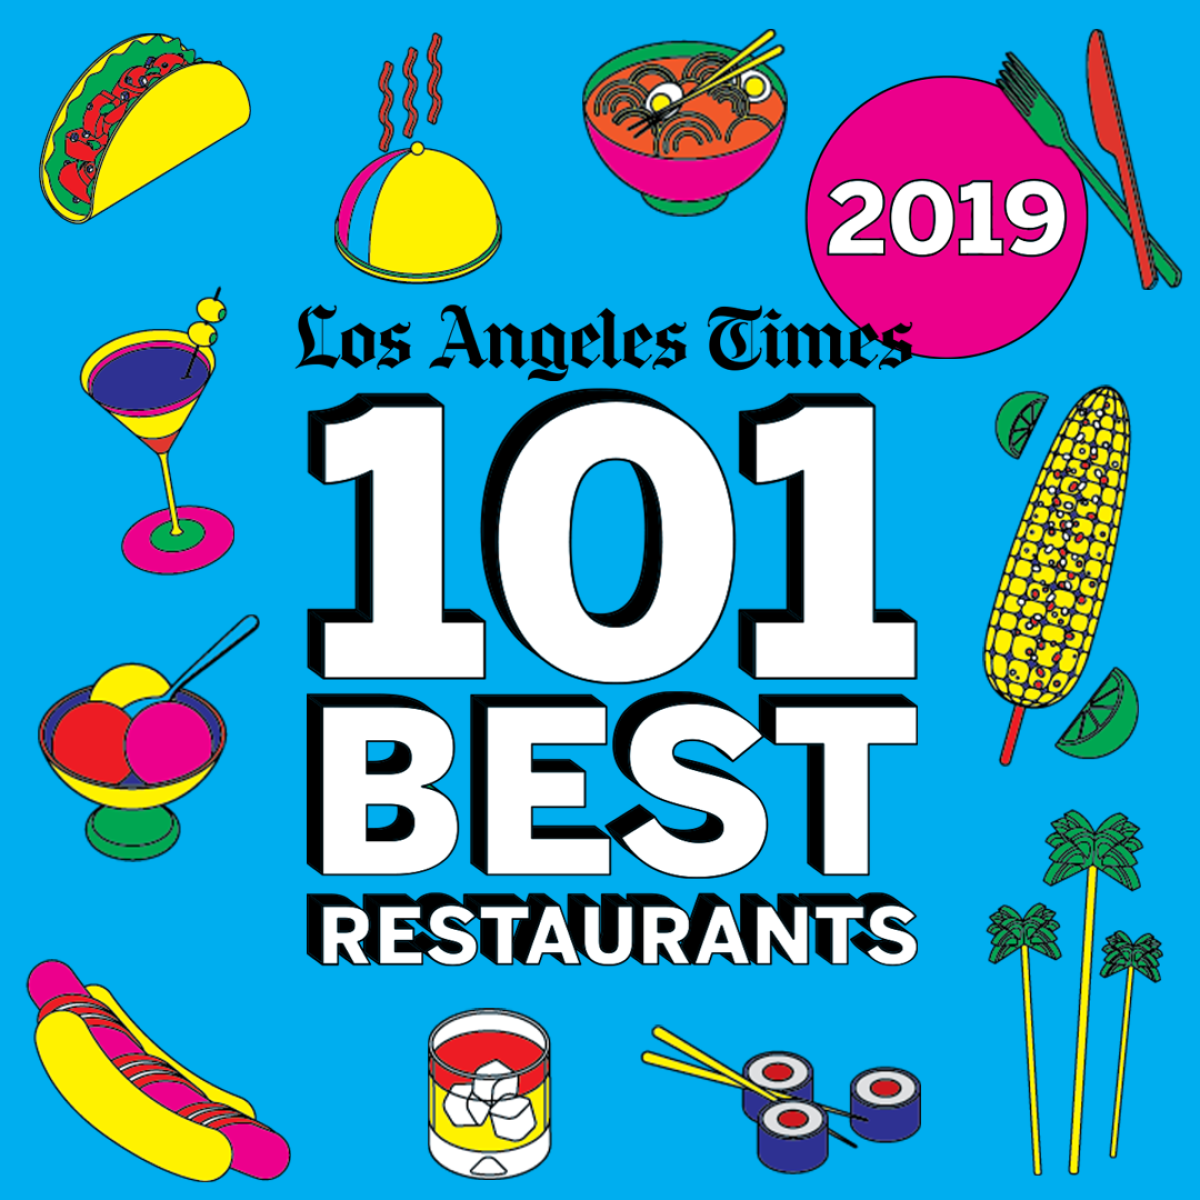 A sneak preview of the 2019 edition of the 101 Best Restaurants in LA.